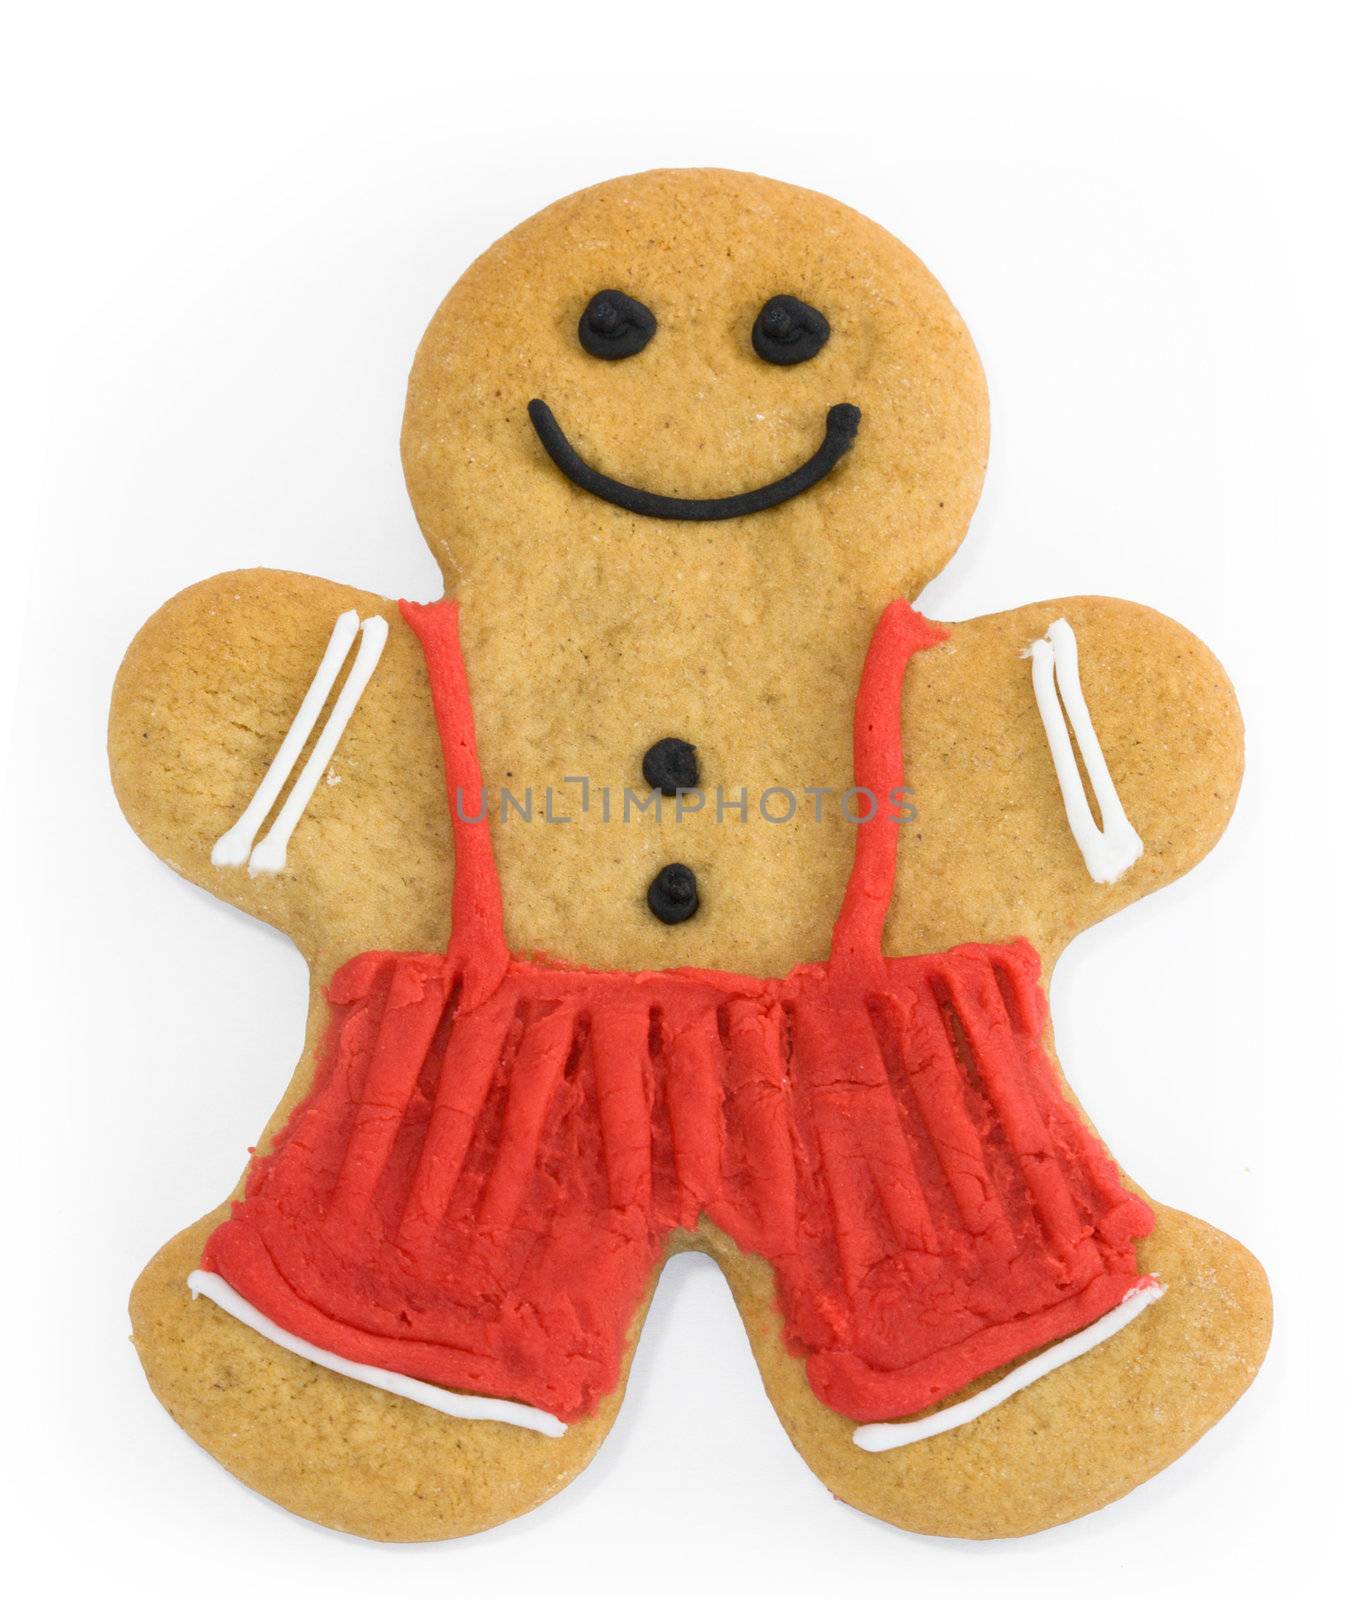 Smiling gingerbread man with dungarees and buttons